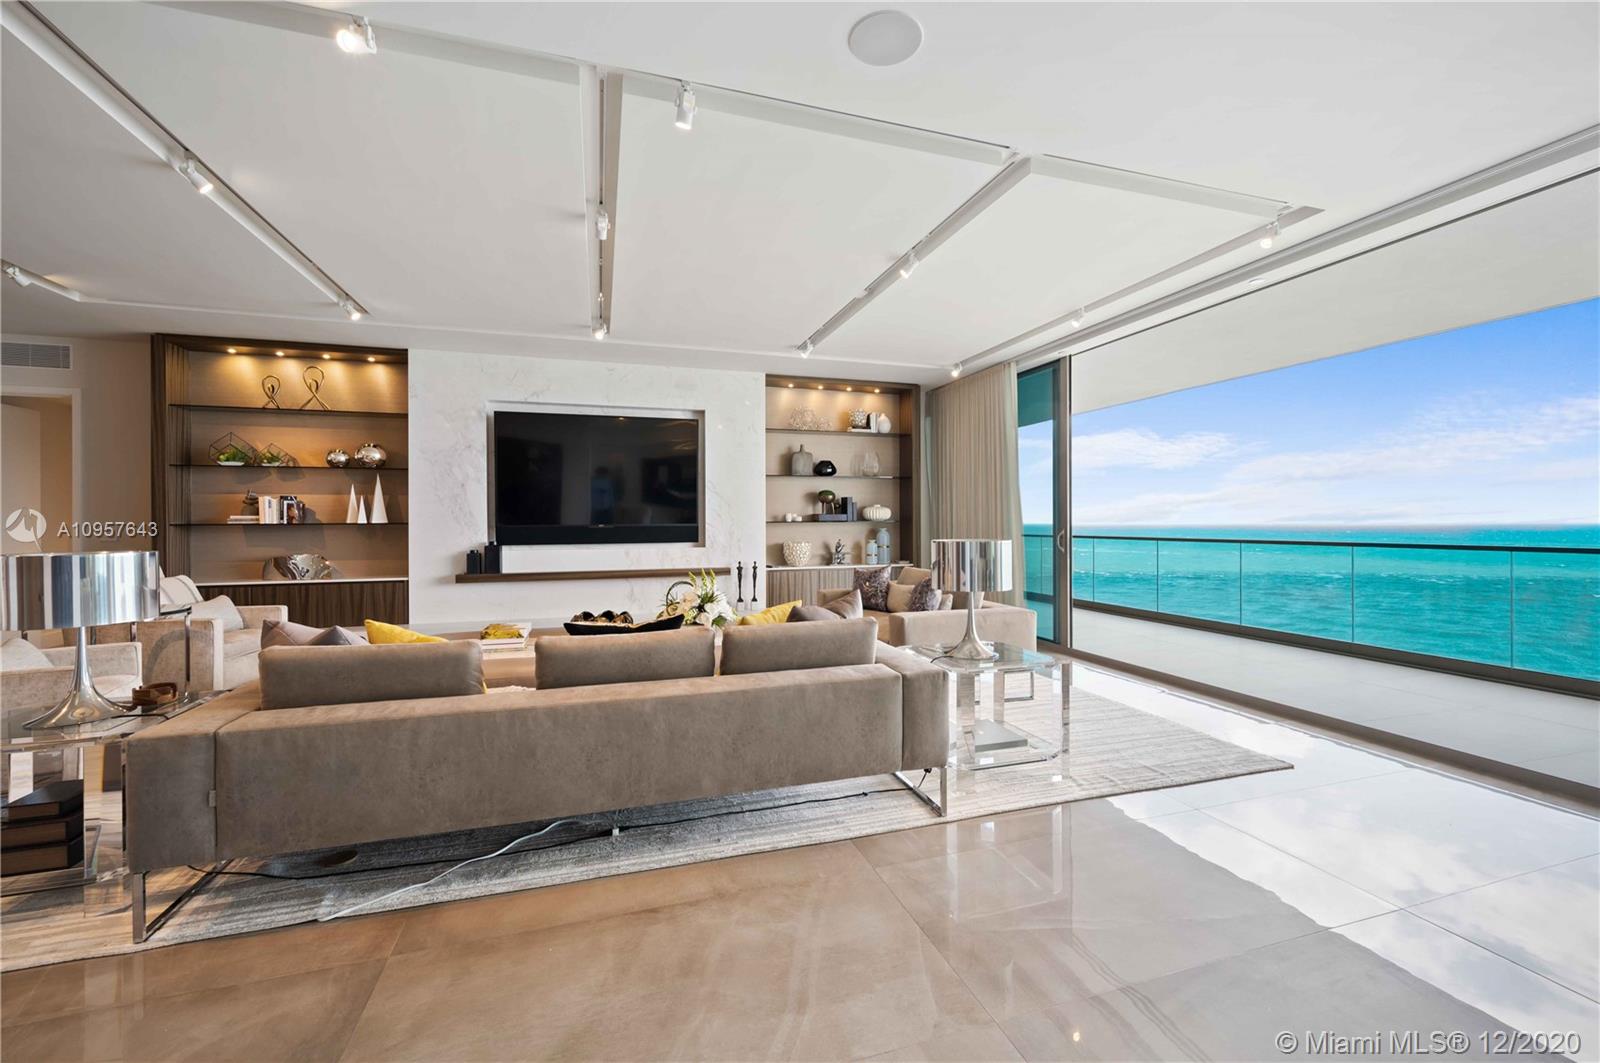 Photo 2 of Oceana Bal Harbour South Apt 1706 in Bal Harbour - MLS A10957643